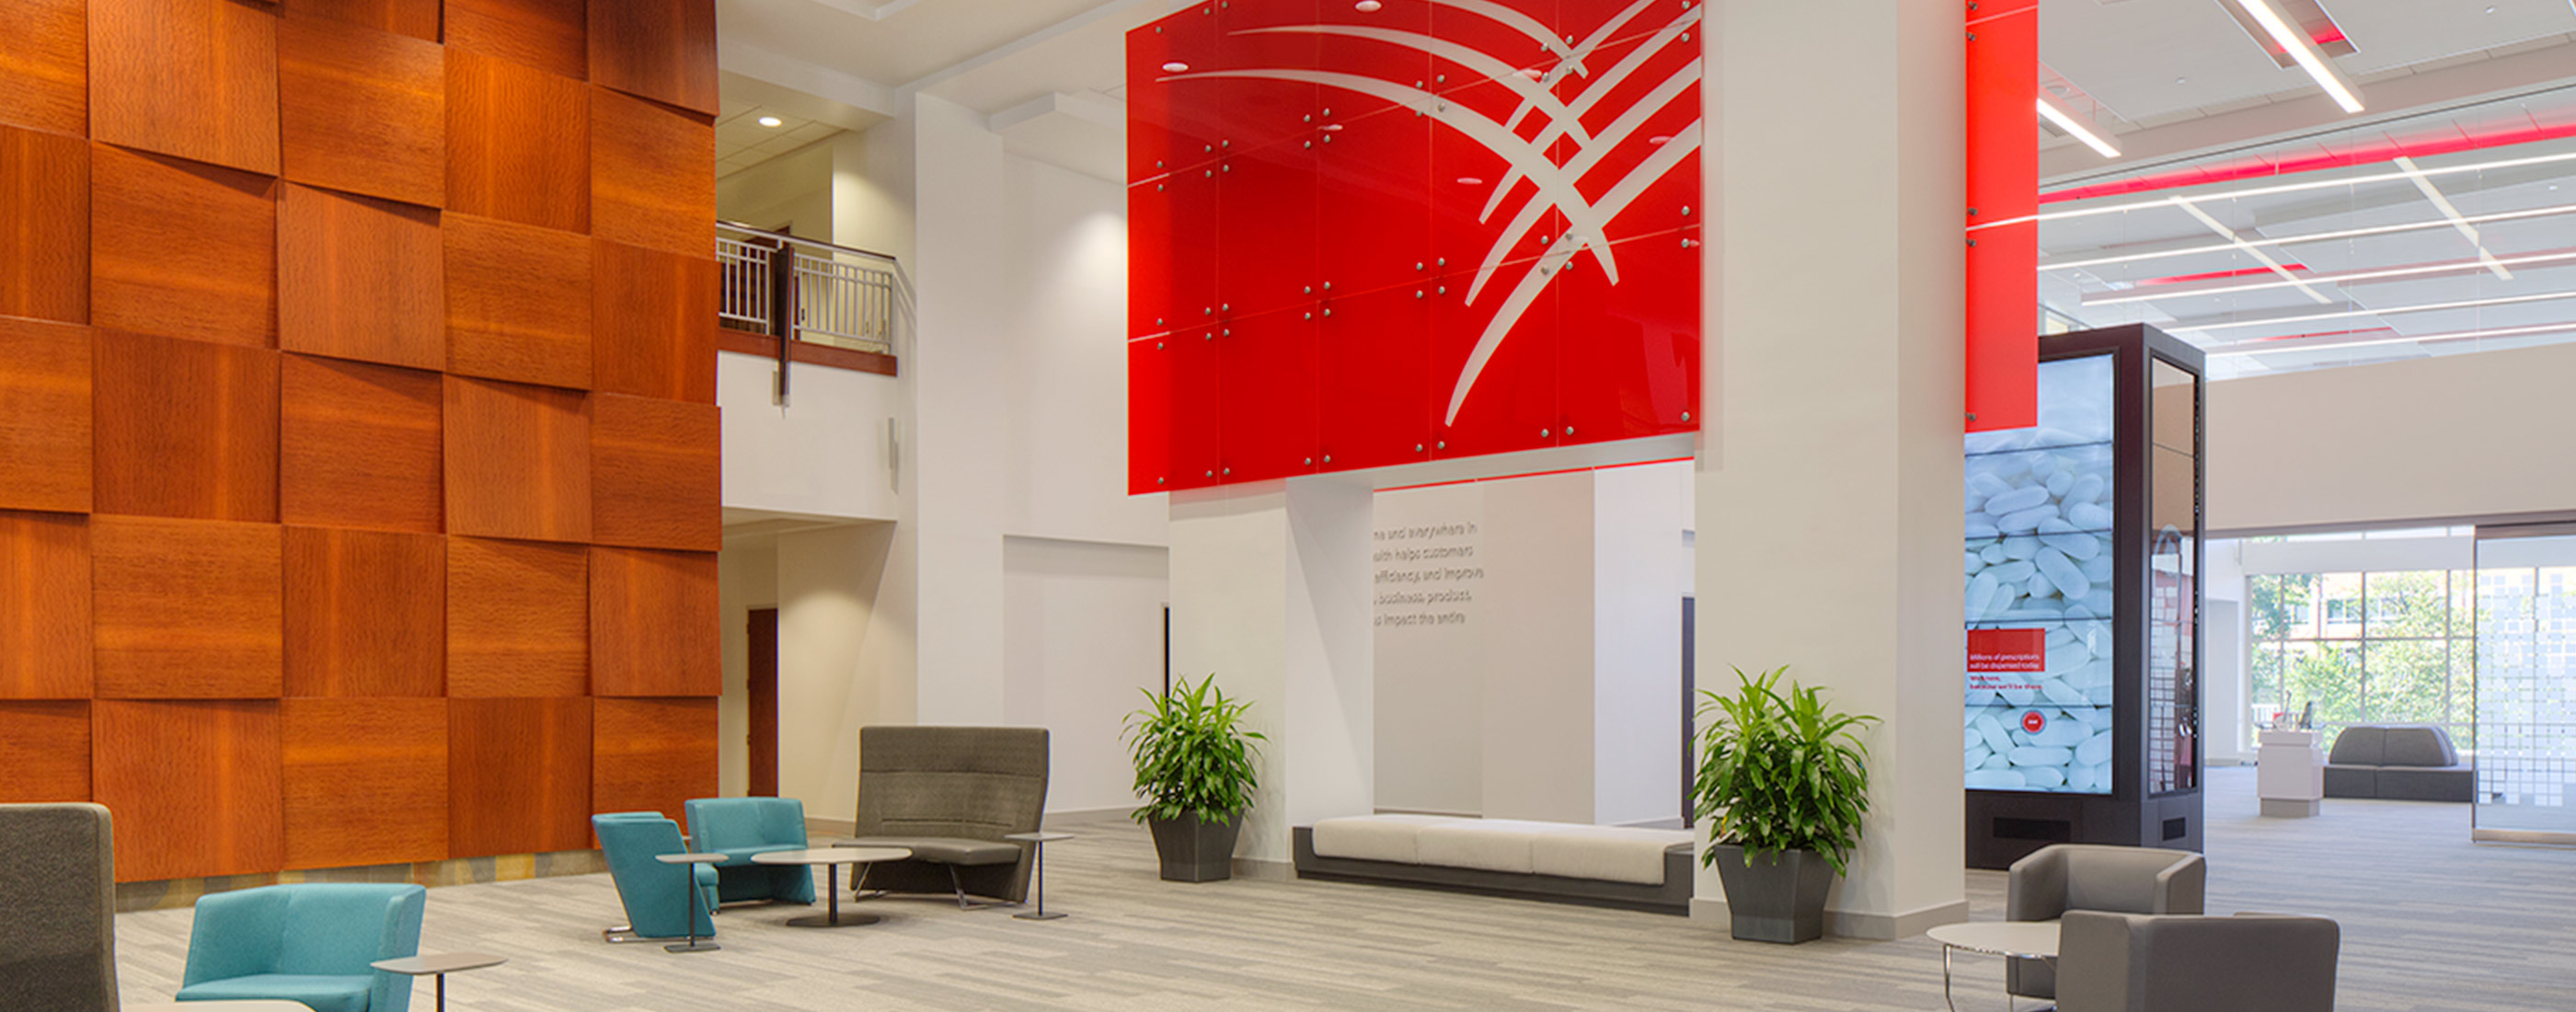 The bright, airy and open lobby at Cardinal Health’s headquarters, helps engage employees and visitors alike.